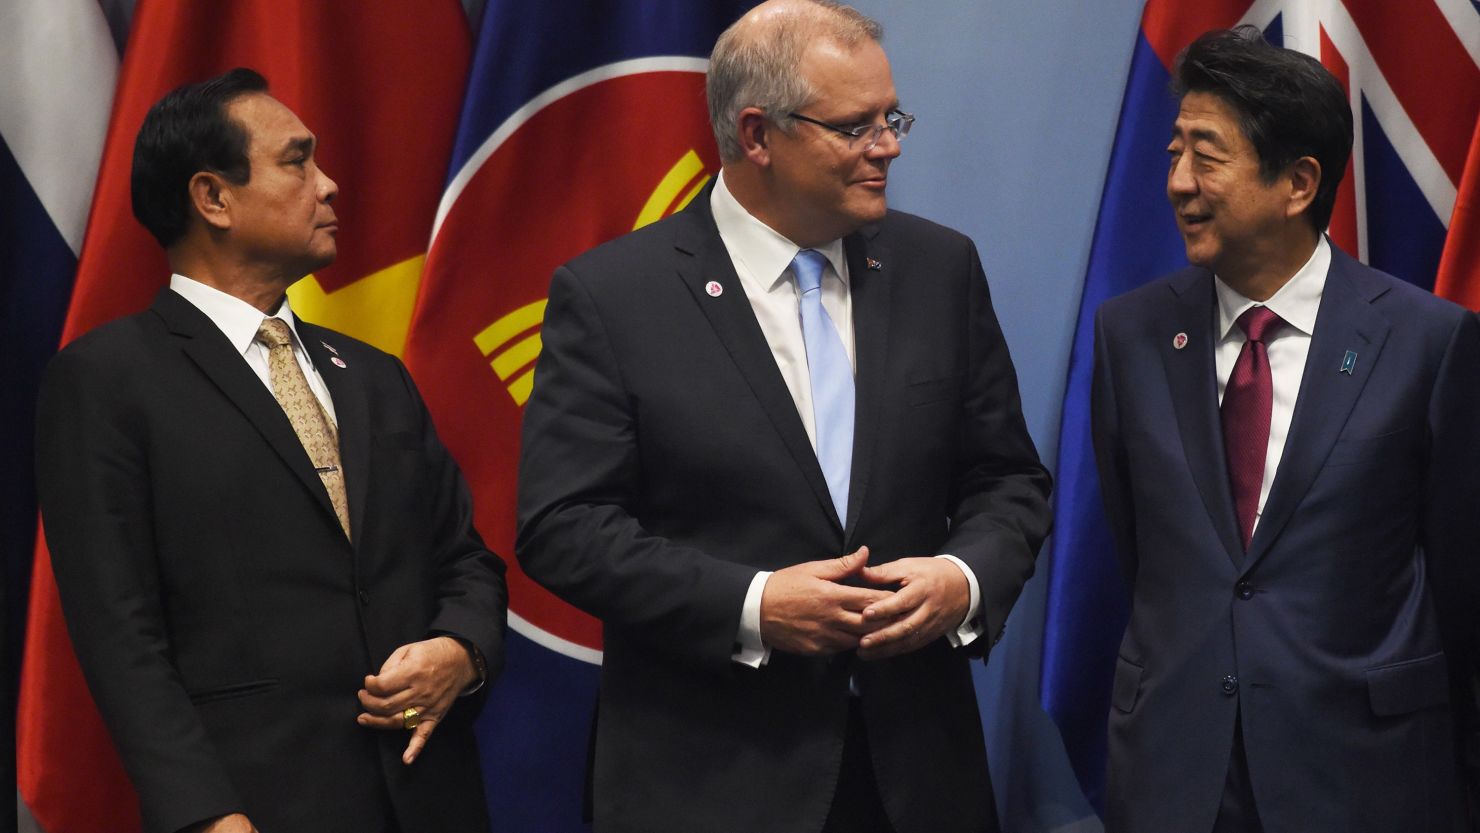 Thai Prime Minister Prayut Chan-O-Cha (left) looks on as Australia's Prime Minister Scott Morrison (center) talks with Japan's Prime Minister Shinzo Abe as they arrive to pose for a group photo in Singapore on November 14.